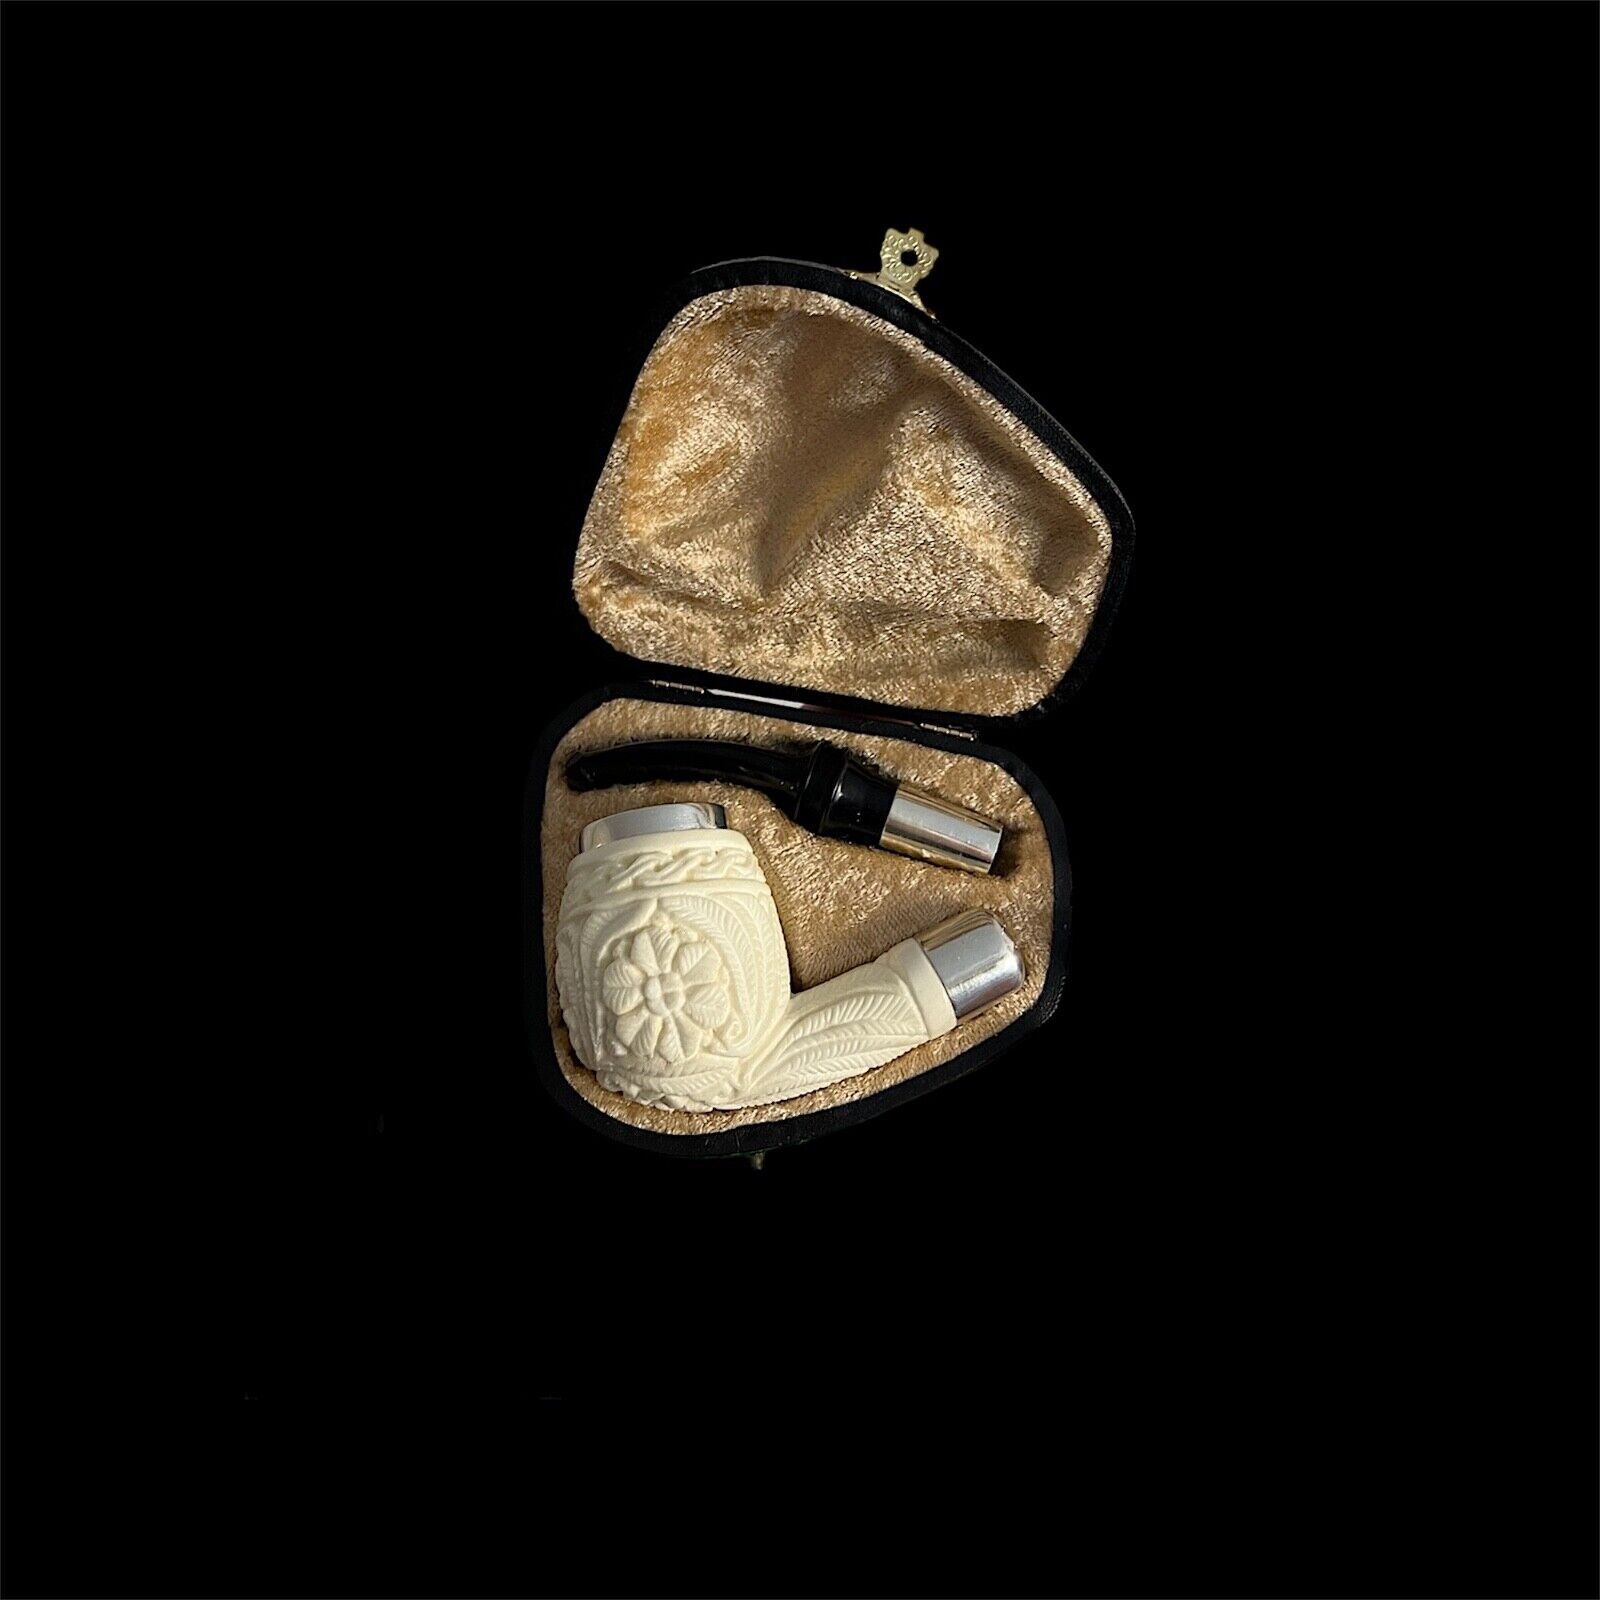 Large Block Meerschaum Pipe 925 silver handmade w fitted case MD-252